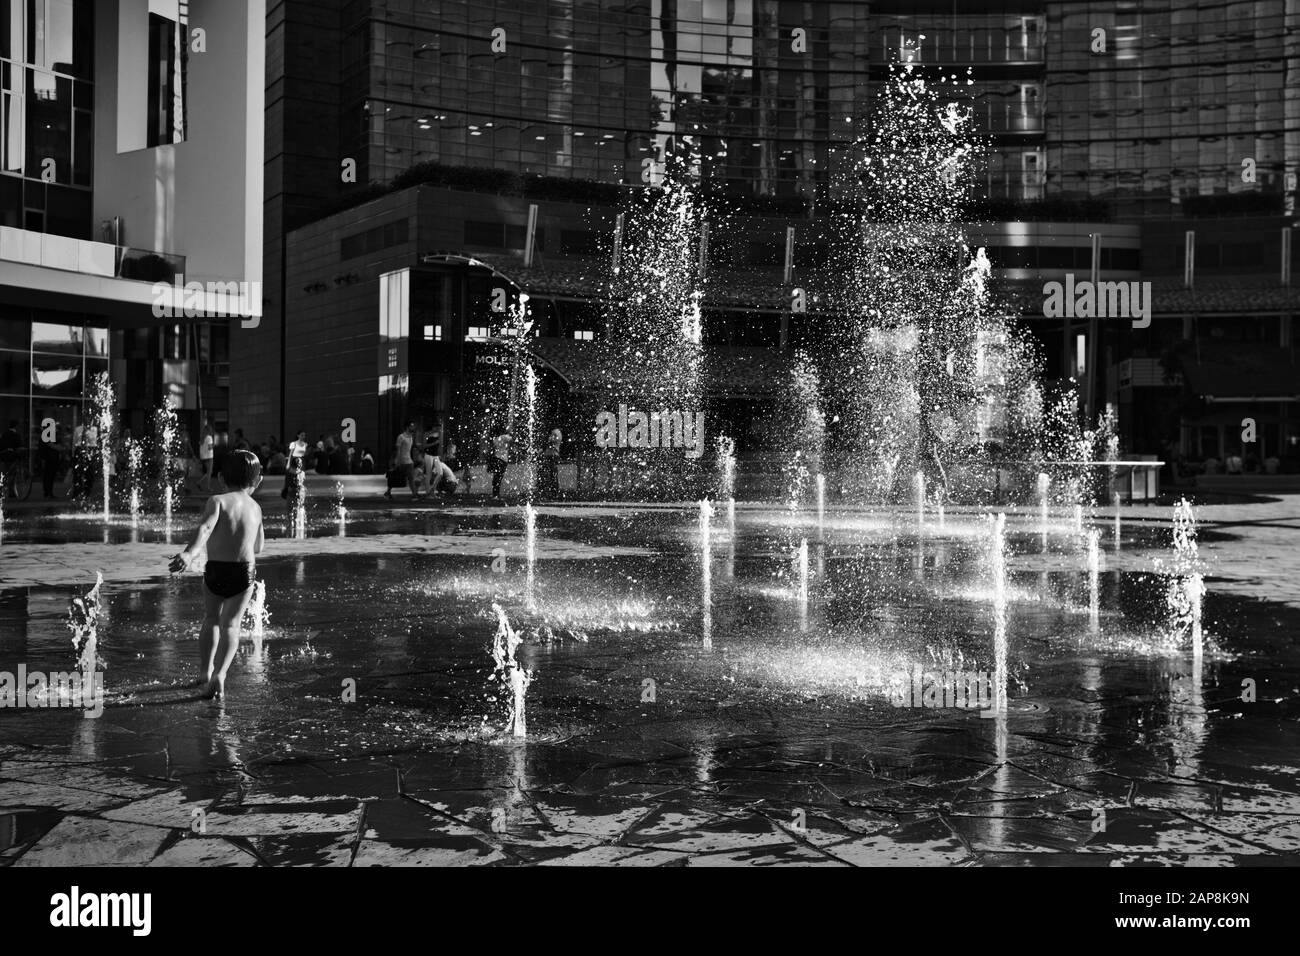 Baby running around the fountain's water jets in Gae Aulenti square - Milan, Italy Stock Photo